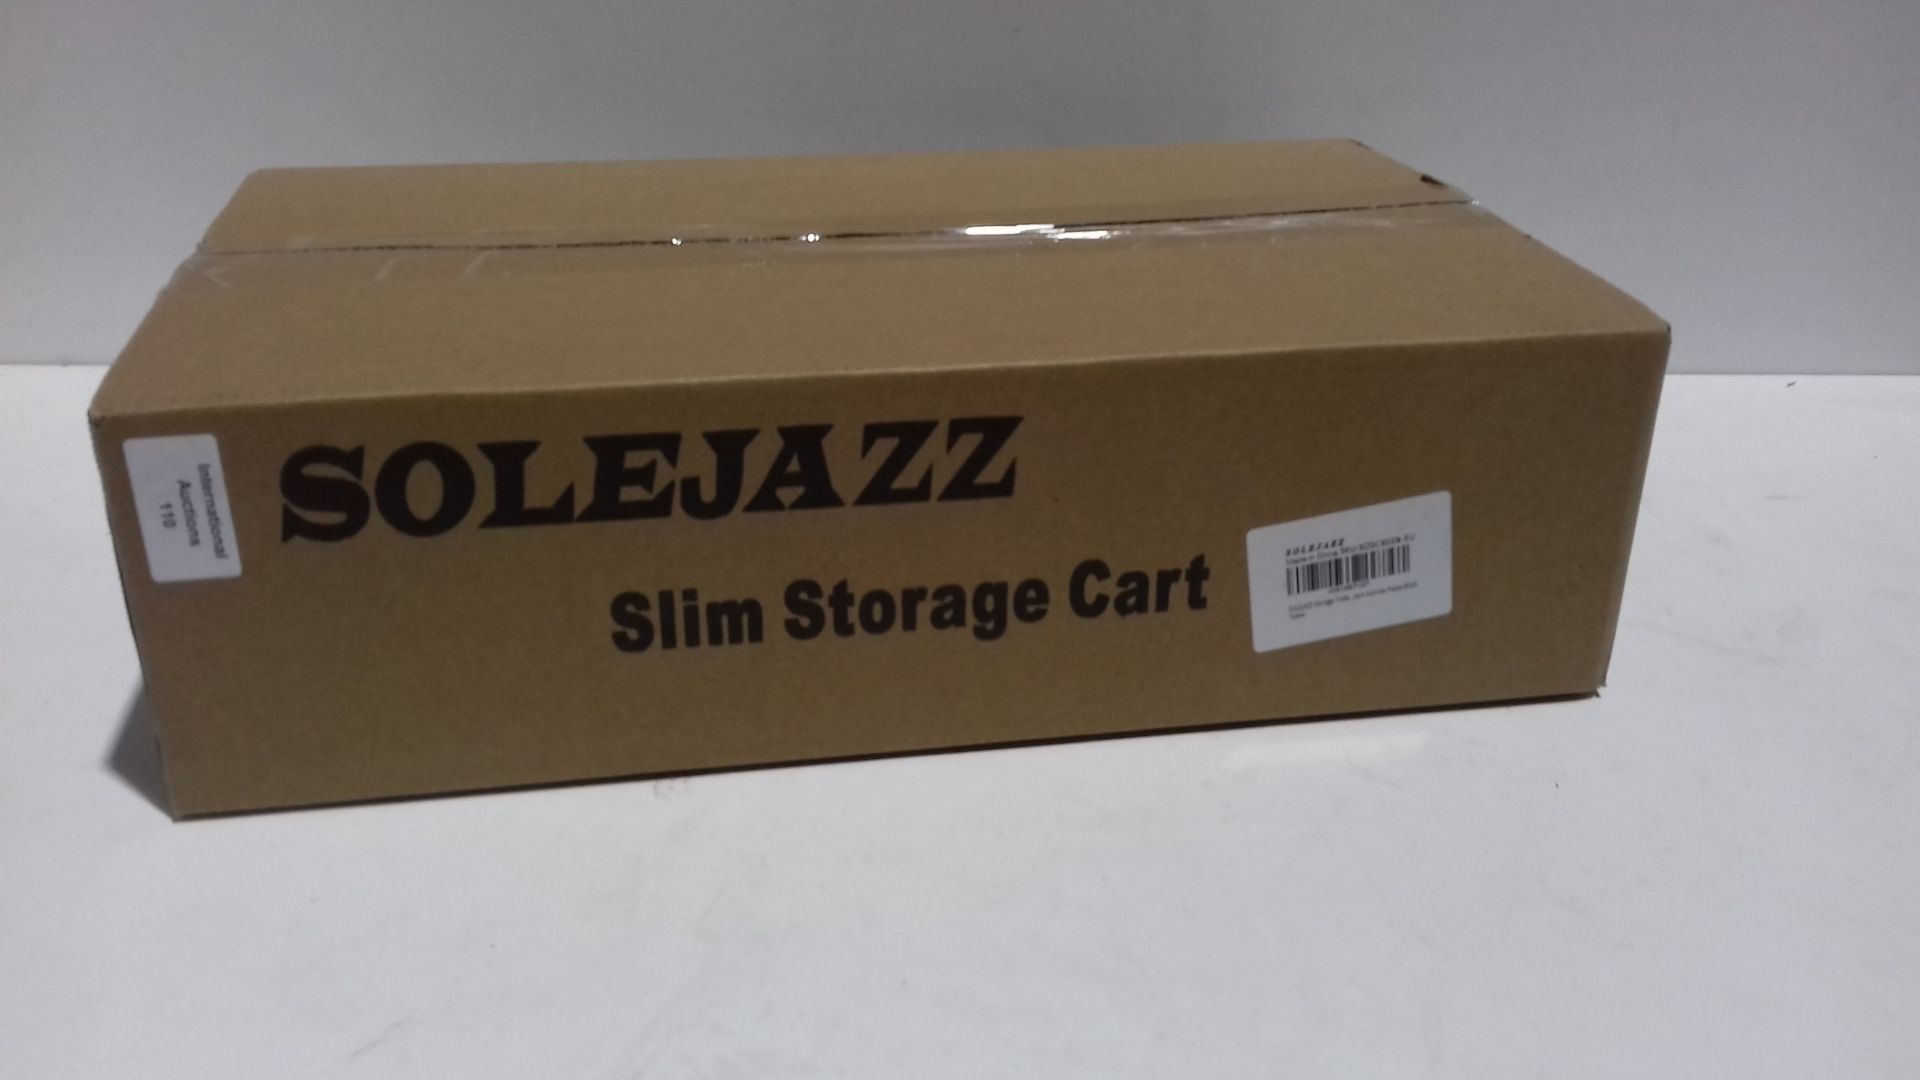 RRP £20.80 SOLEJAZZ 3-Tier Storage Trolley Cart Slide-out Rolling - Image 2 of 2